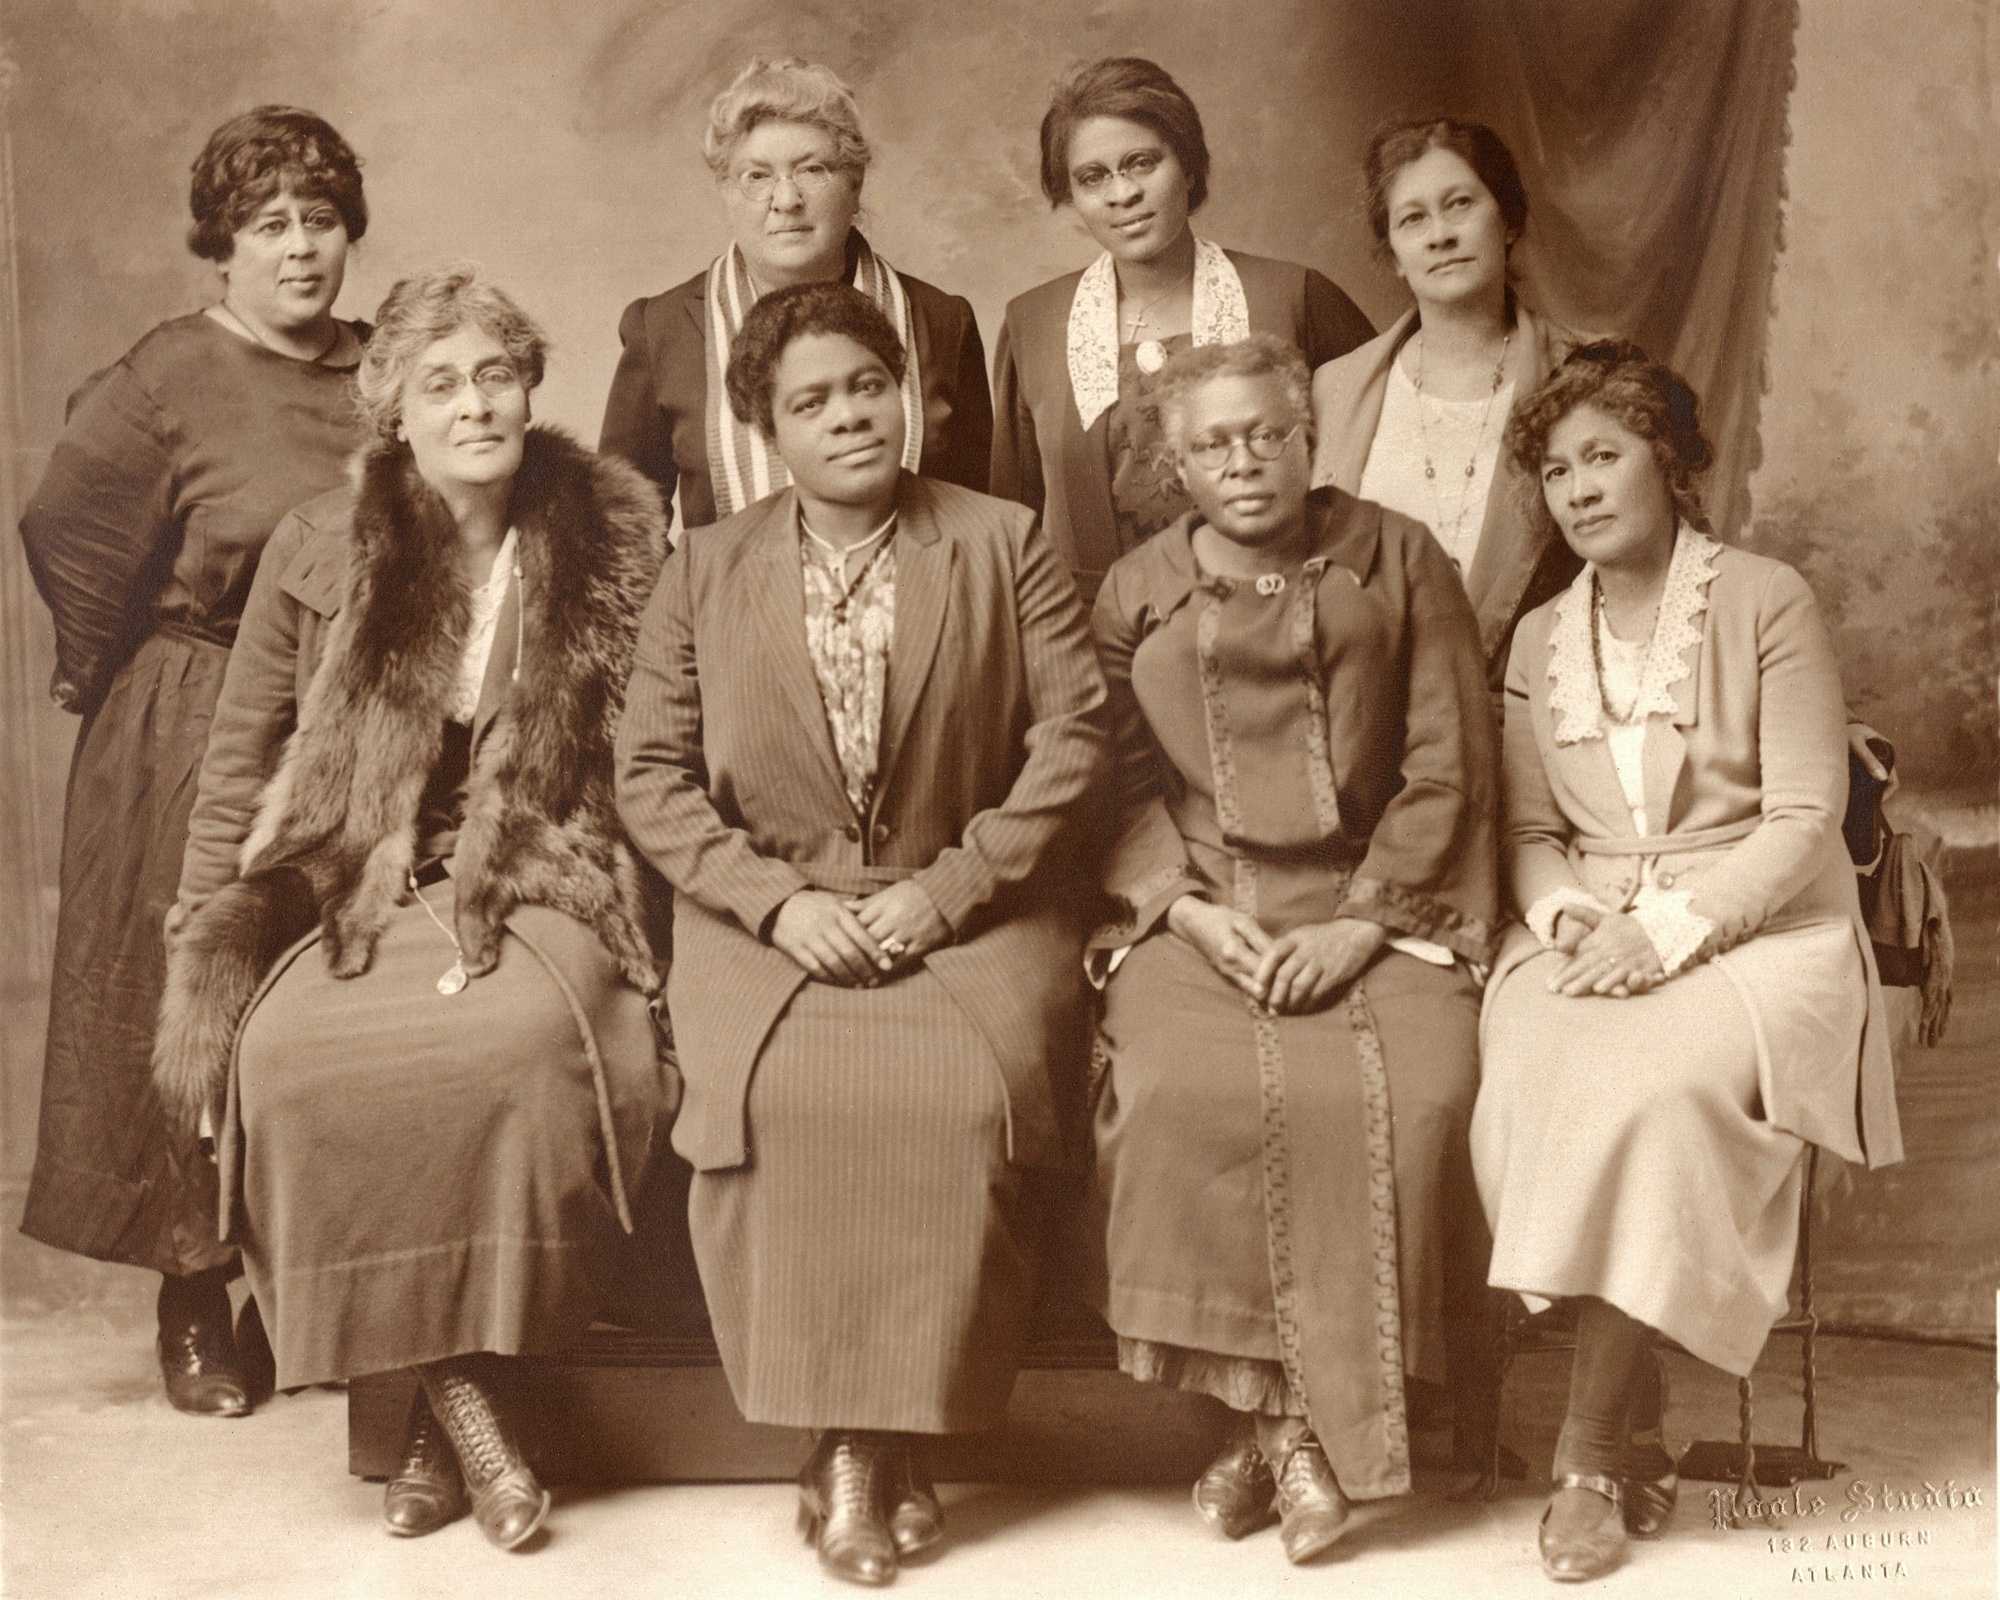 Photograph of Mary McLeod Bethune with members of the Southeastern Federation of Colored Women’s Clubs